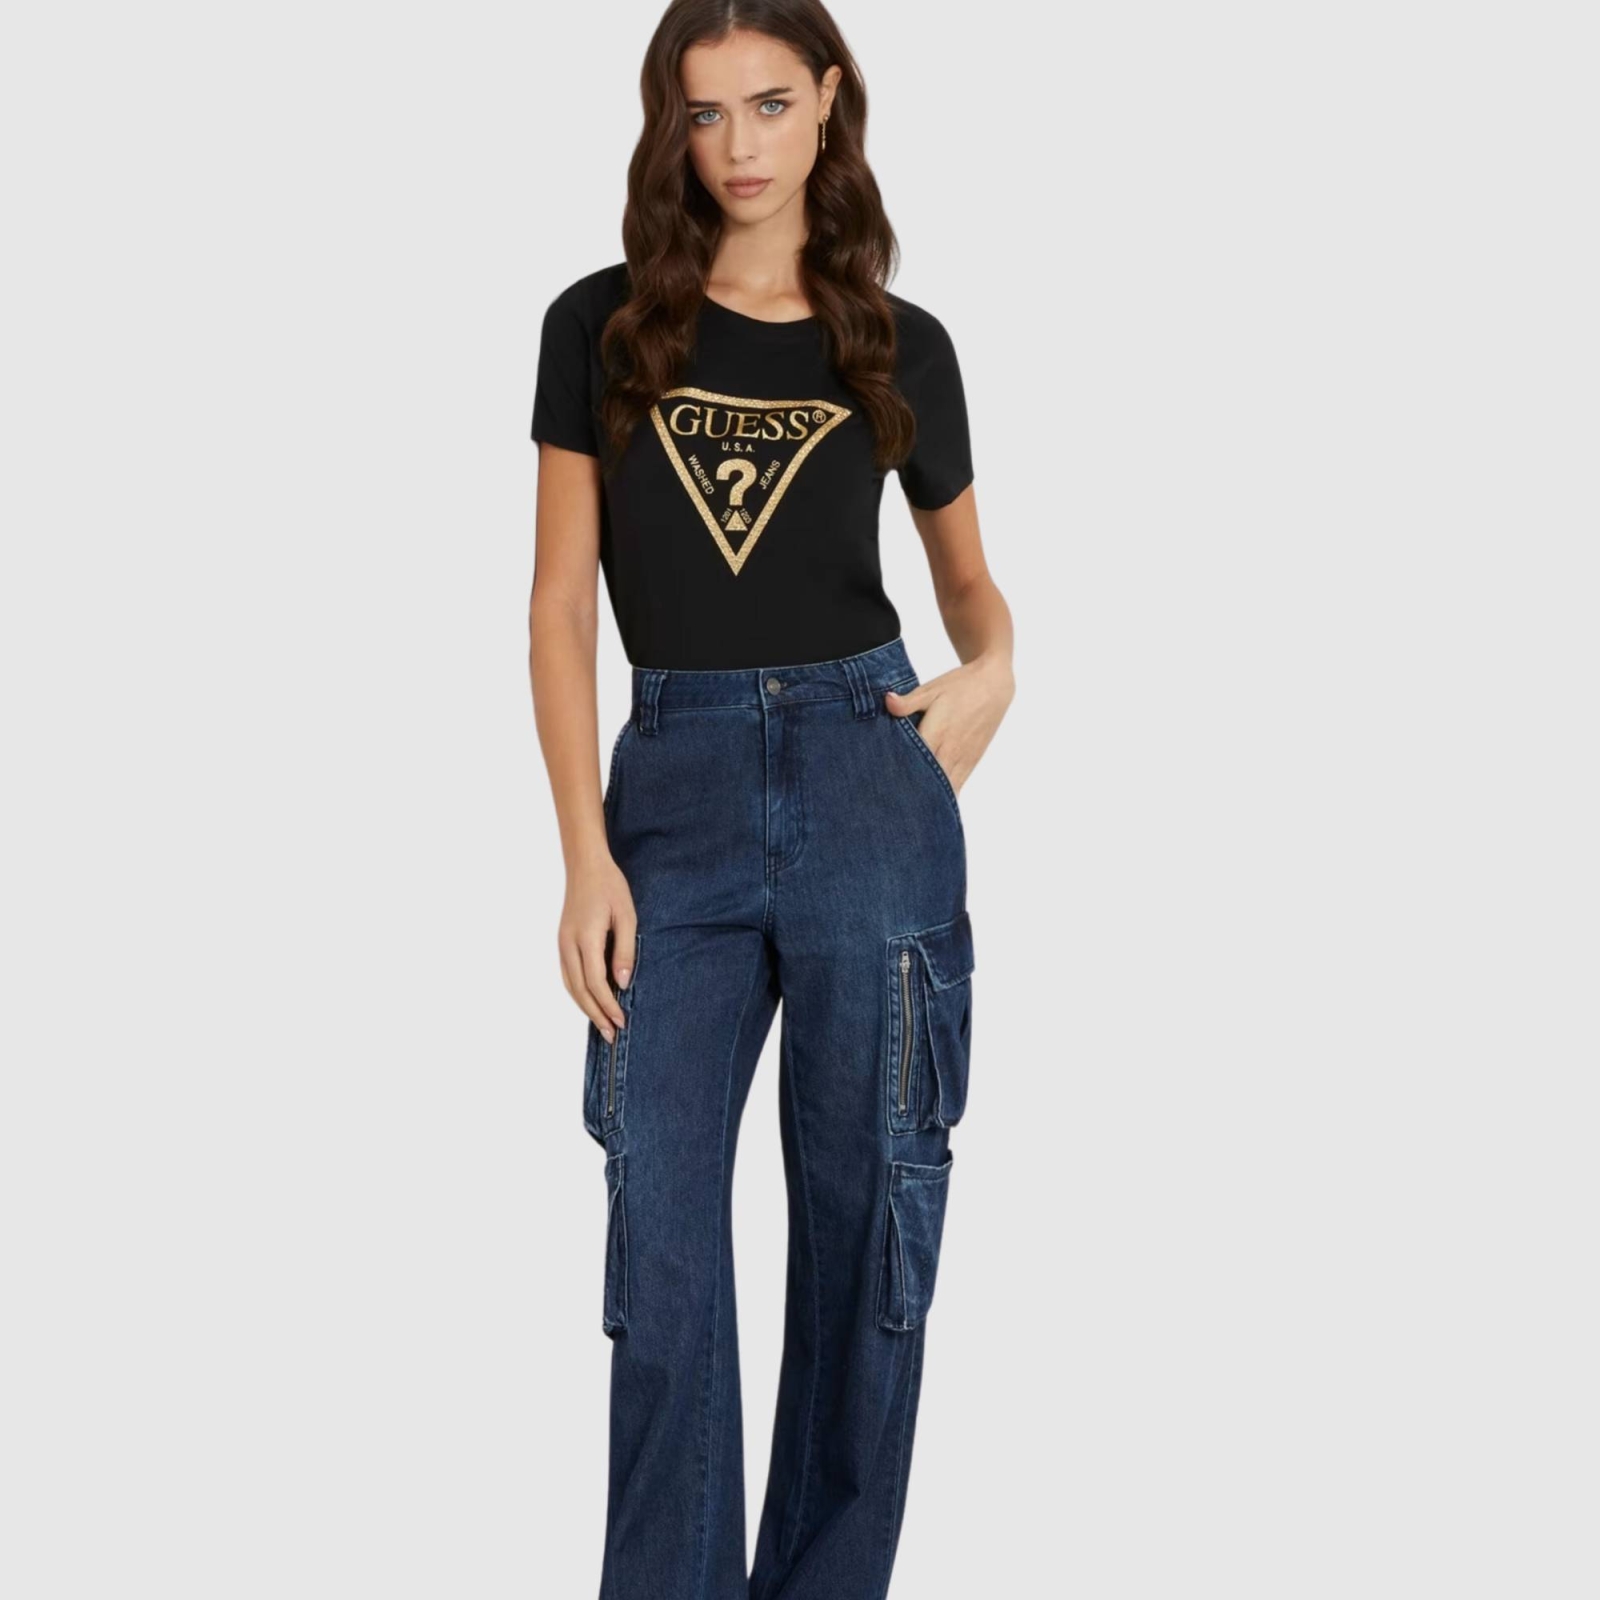 GUESS GOLD TRIANGLE T-SHIRT